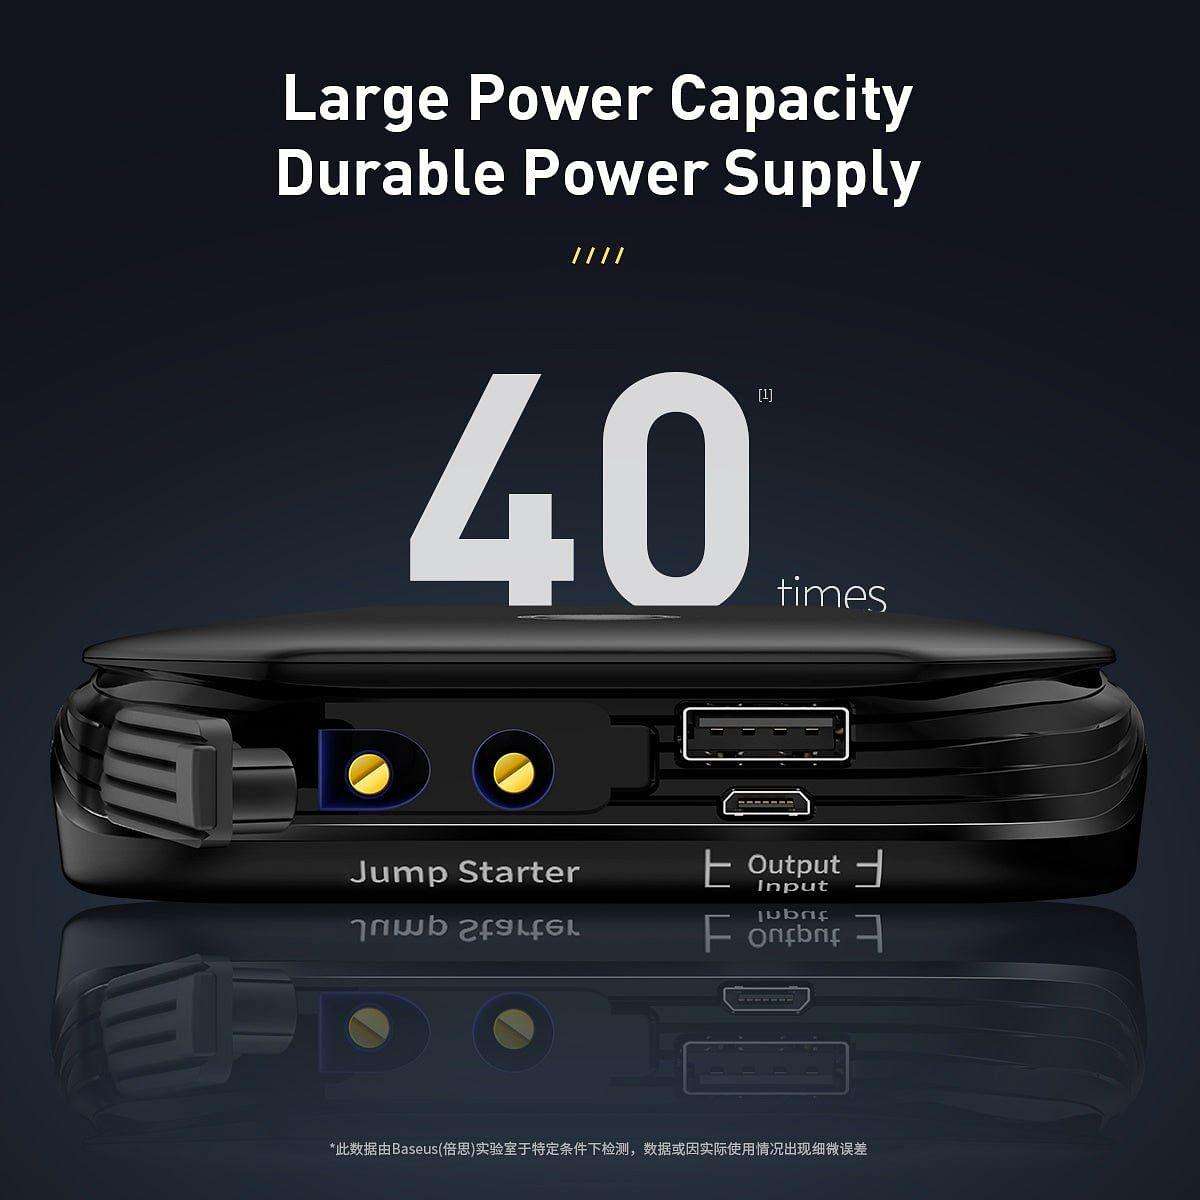 Car Jump Starter Power Bank 69000mAh 12V Starting Device Portable Emergency  Car Booster Auto Car Battery Charger